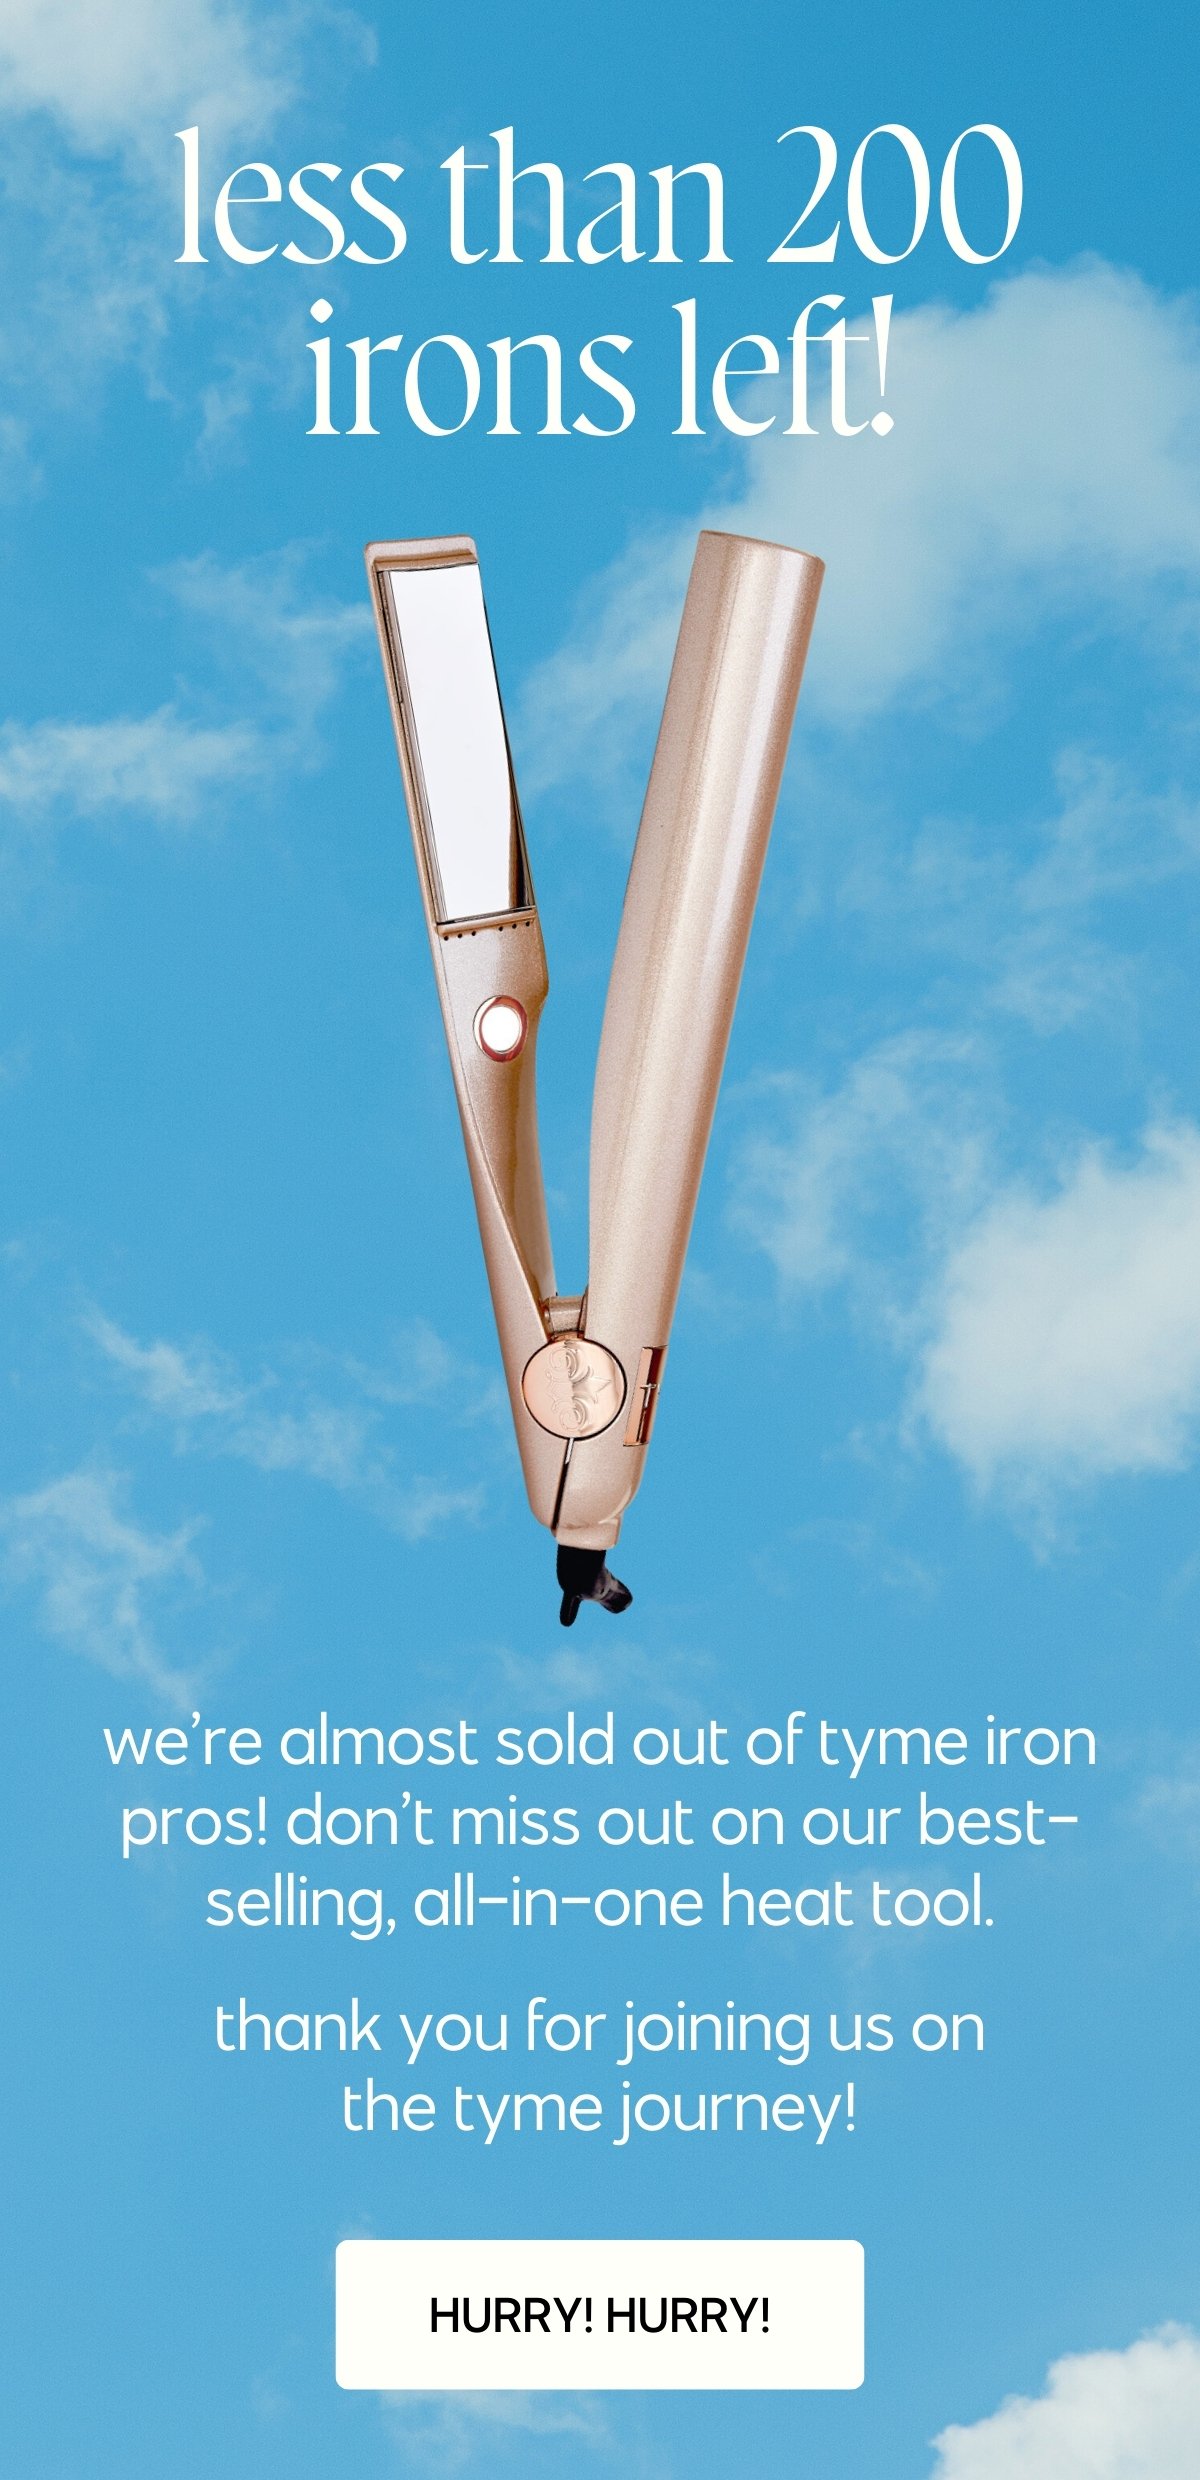 less than 200 tyme irons left!